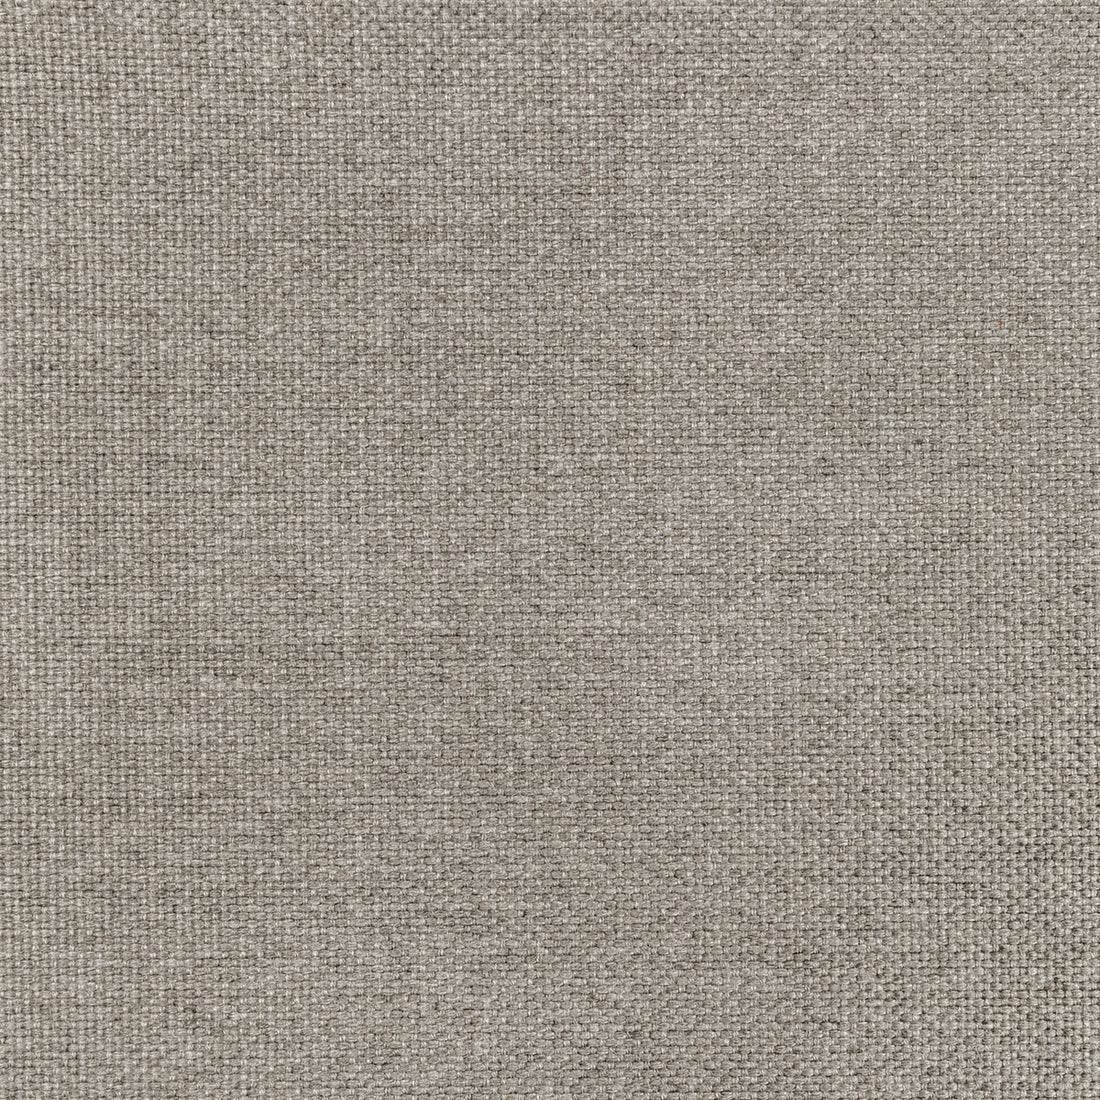 Kravet Basics fabric in 36826-52 color - pattern 36826.52.0 - by Kravet Basics in the Indoor / Outdoor collection